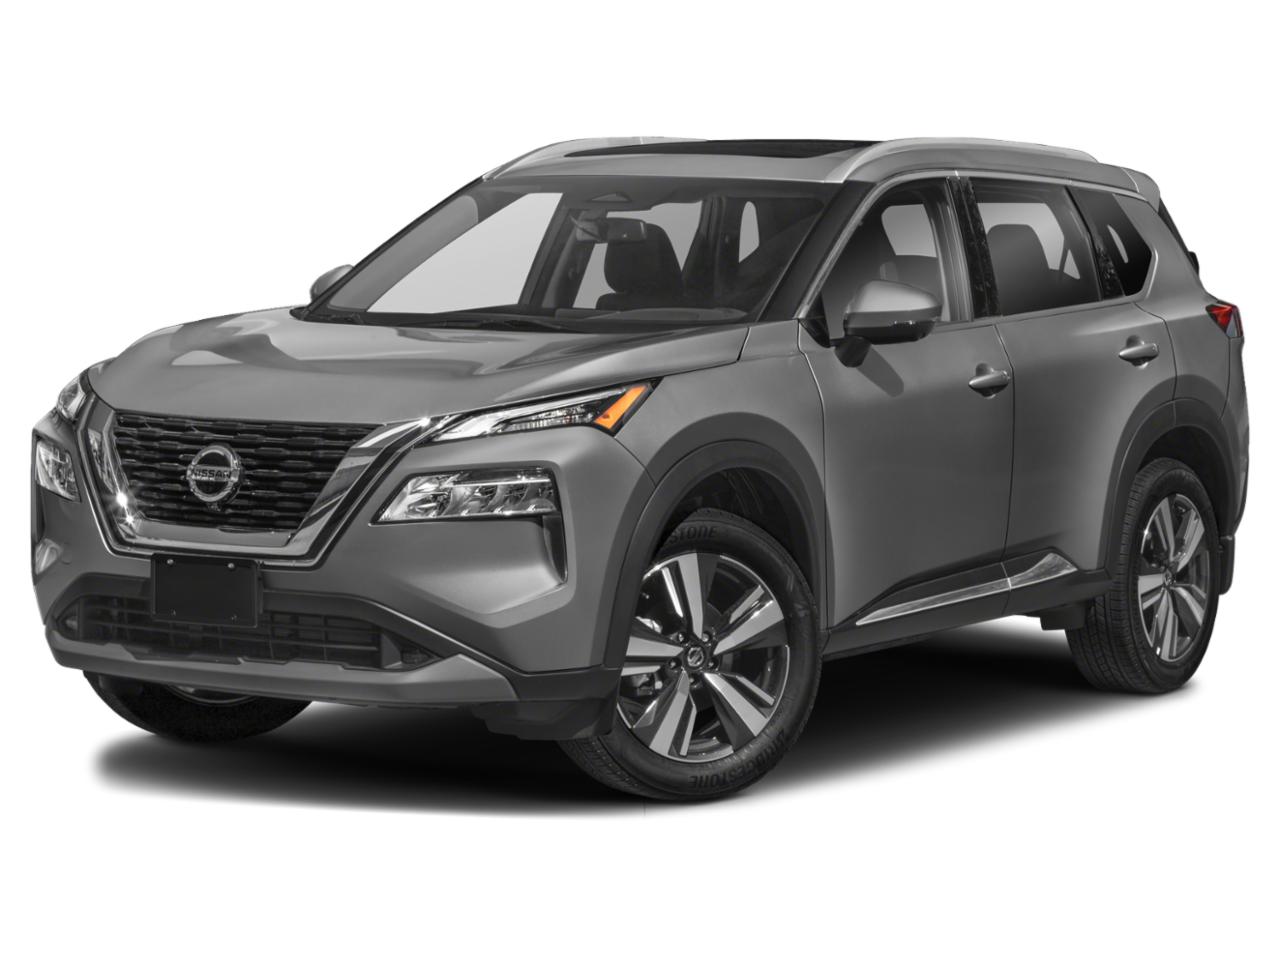 2021 Nissan Rogue Vehicle Photo in Pleasant Hills, PA 15236